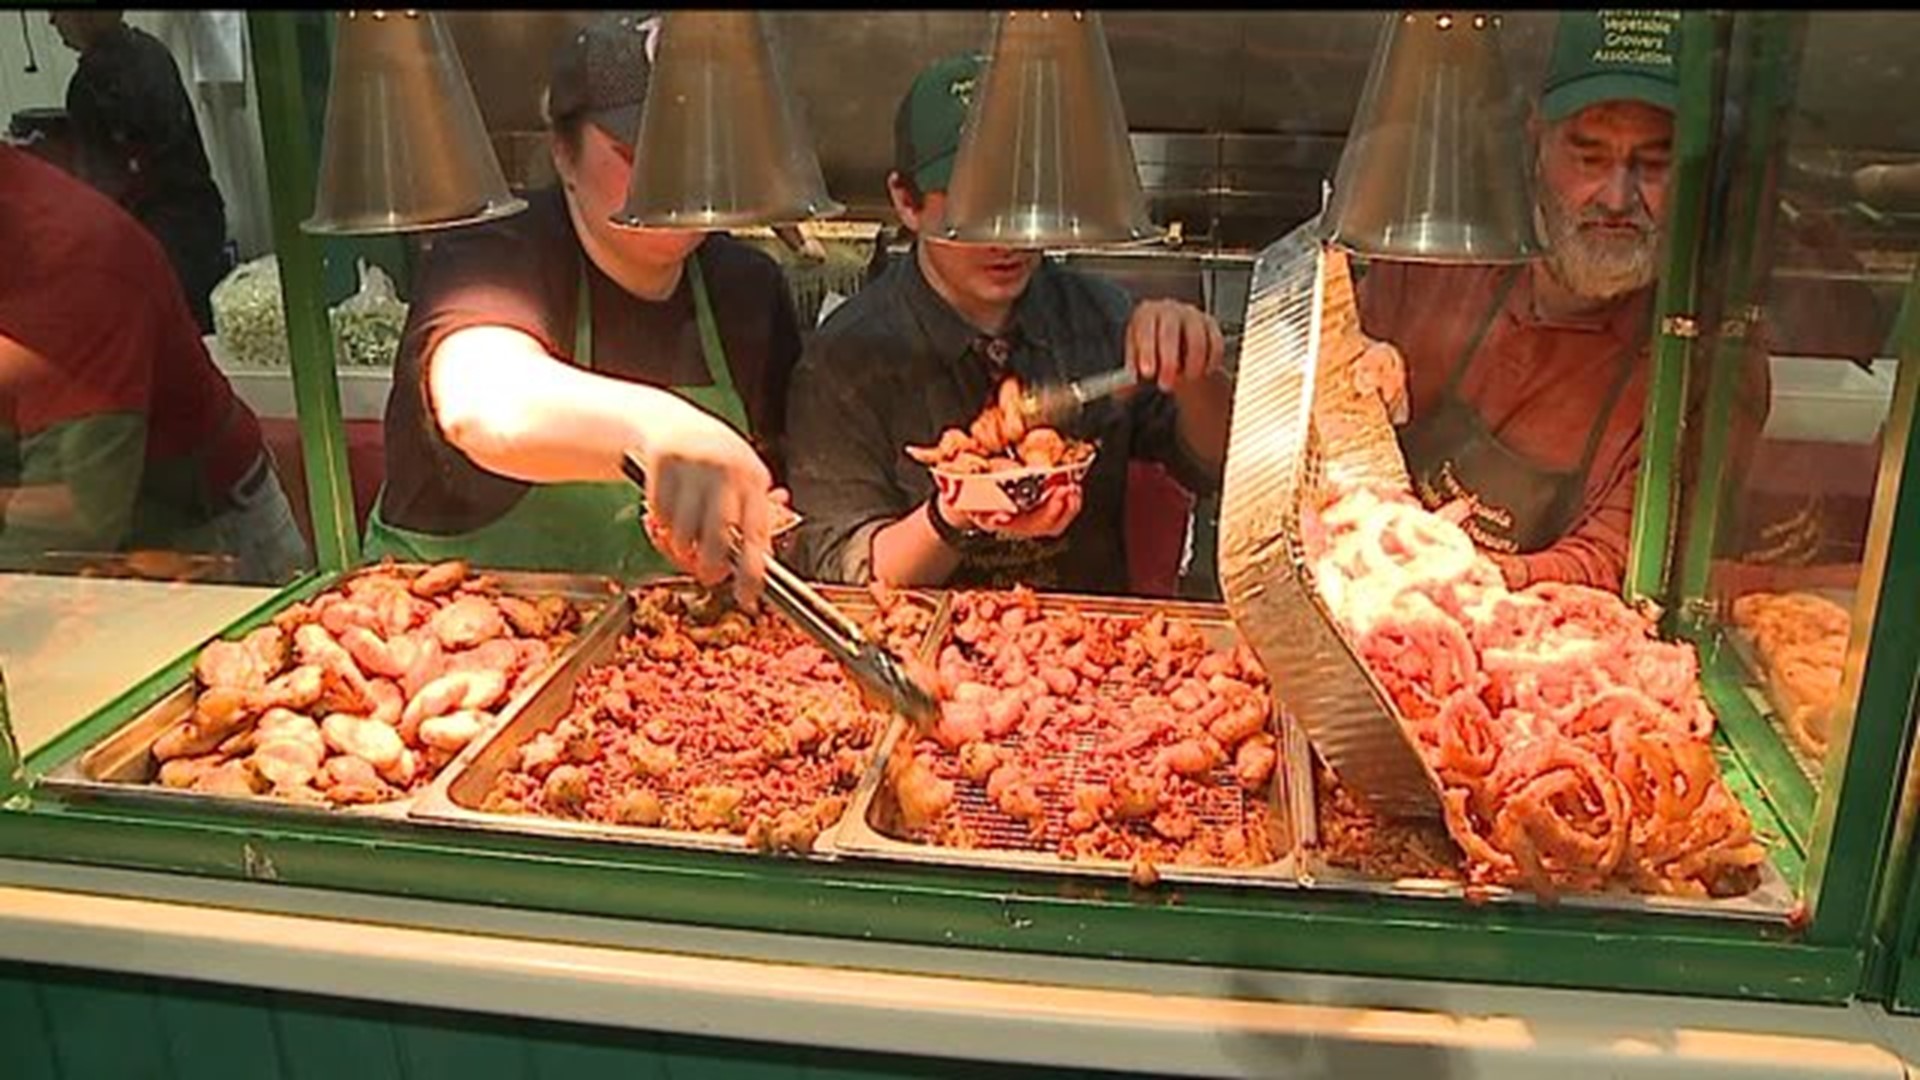 PA Farm Show food court set to open Friday